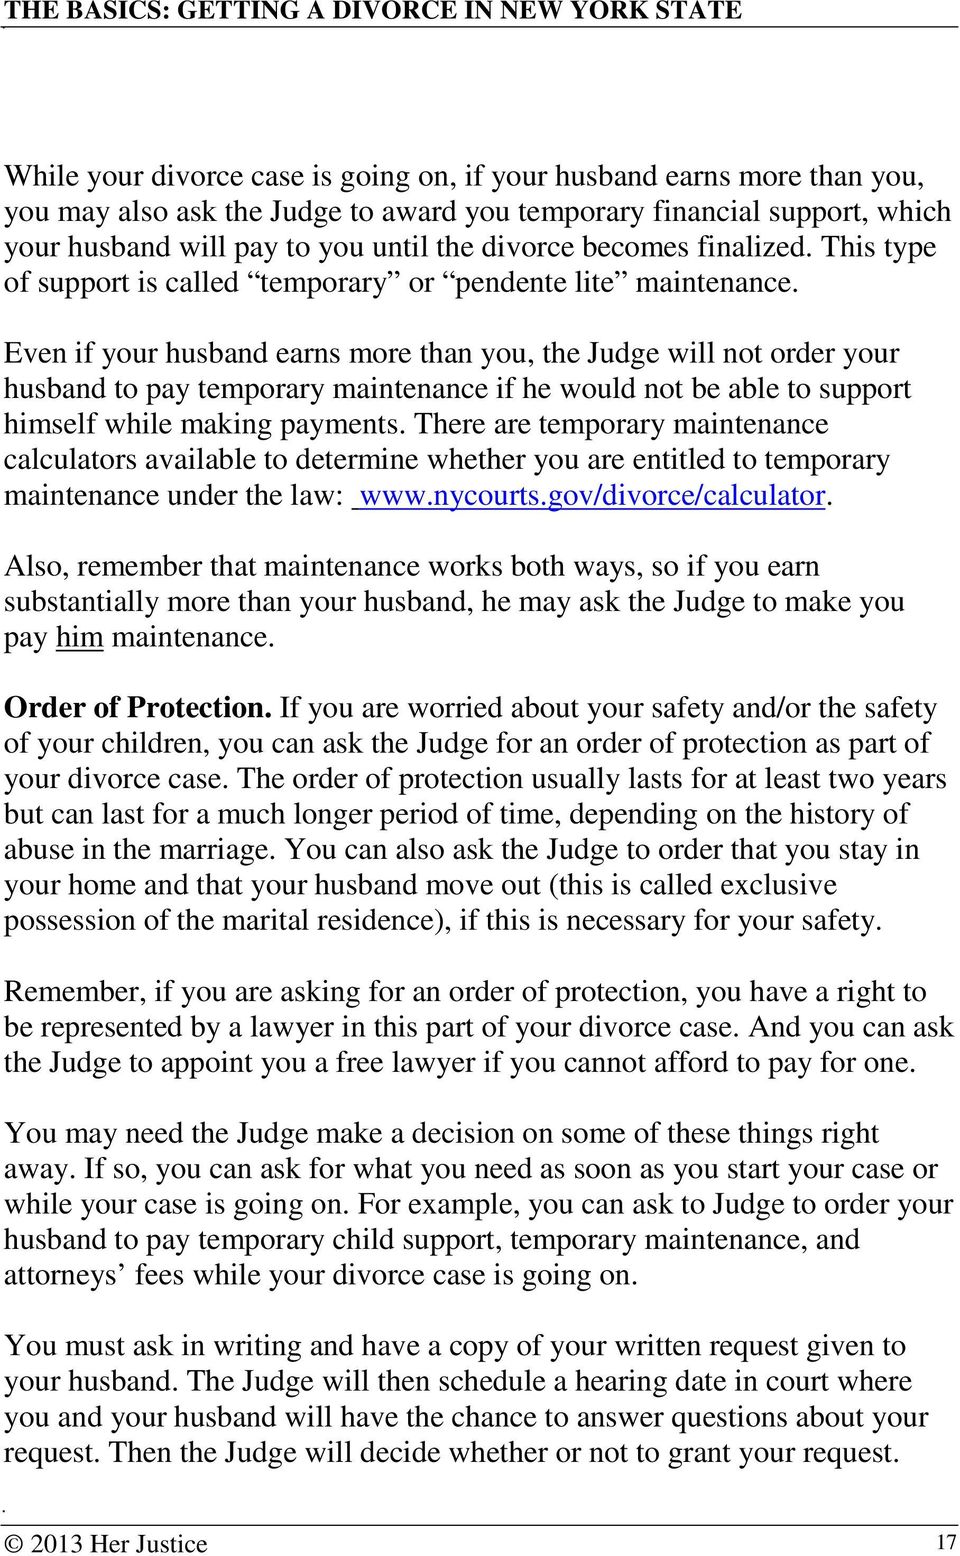 Even if your husband earns more than you, the Judge will not order your husband to pay temporary maintenance if he would not be able to support himself while making payments.